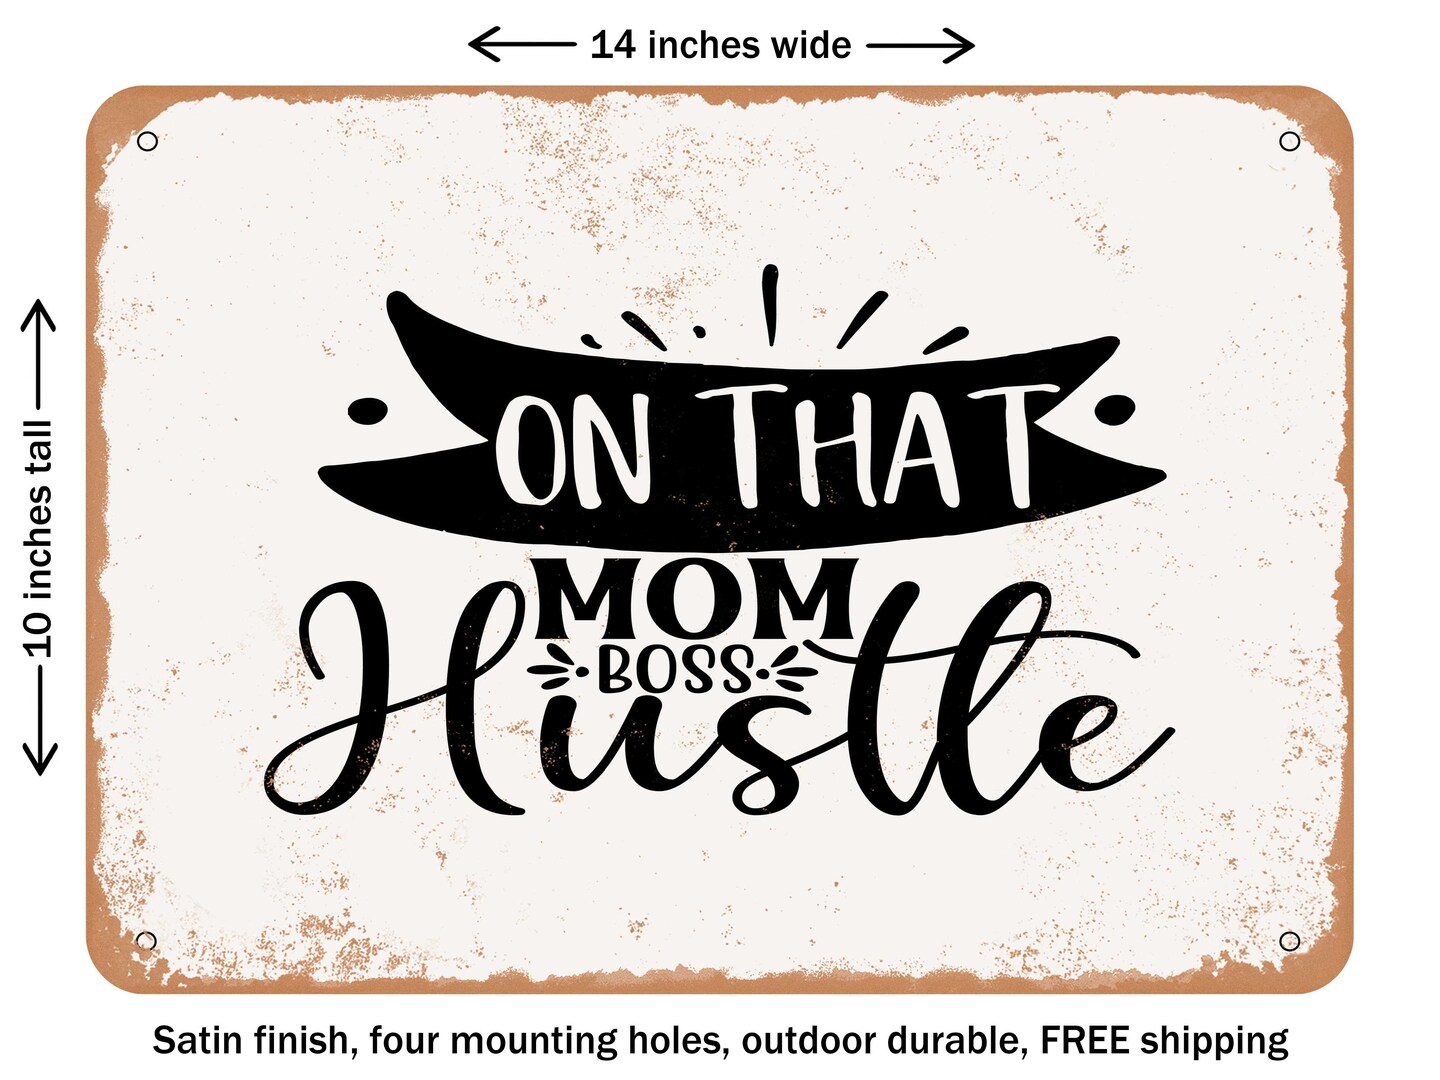 DECORATIVE METAL SIGN - On That Mom Boss Hustle - Vintage Rusty Look